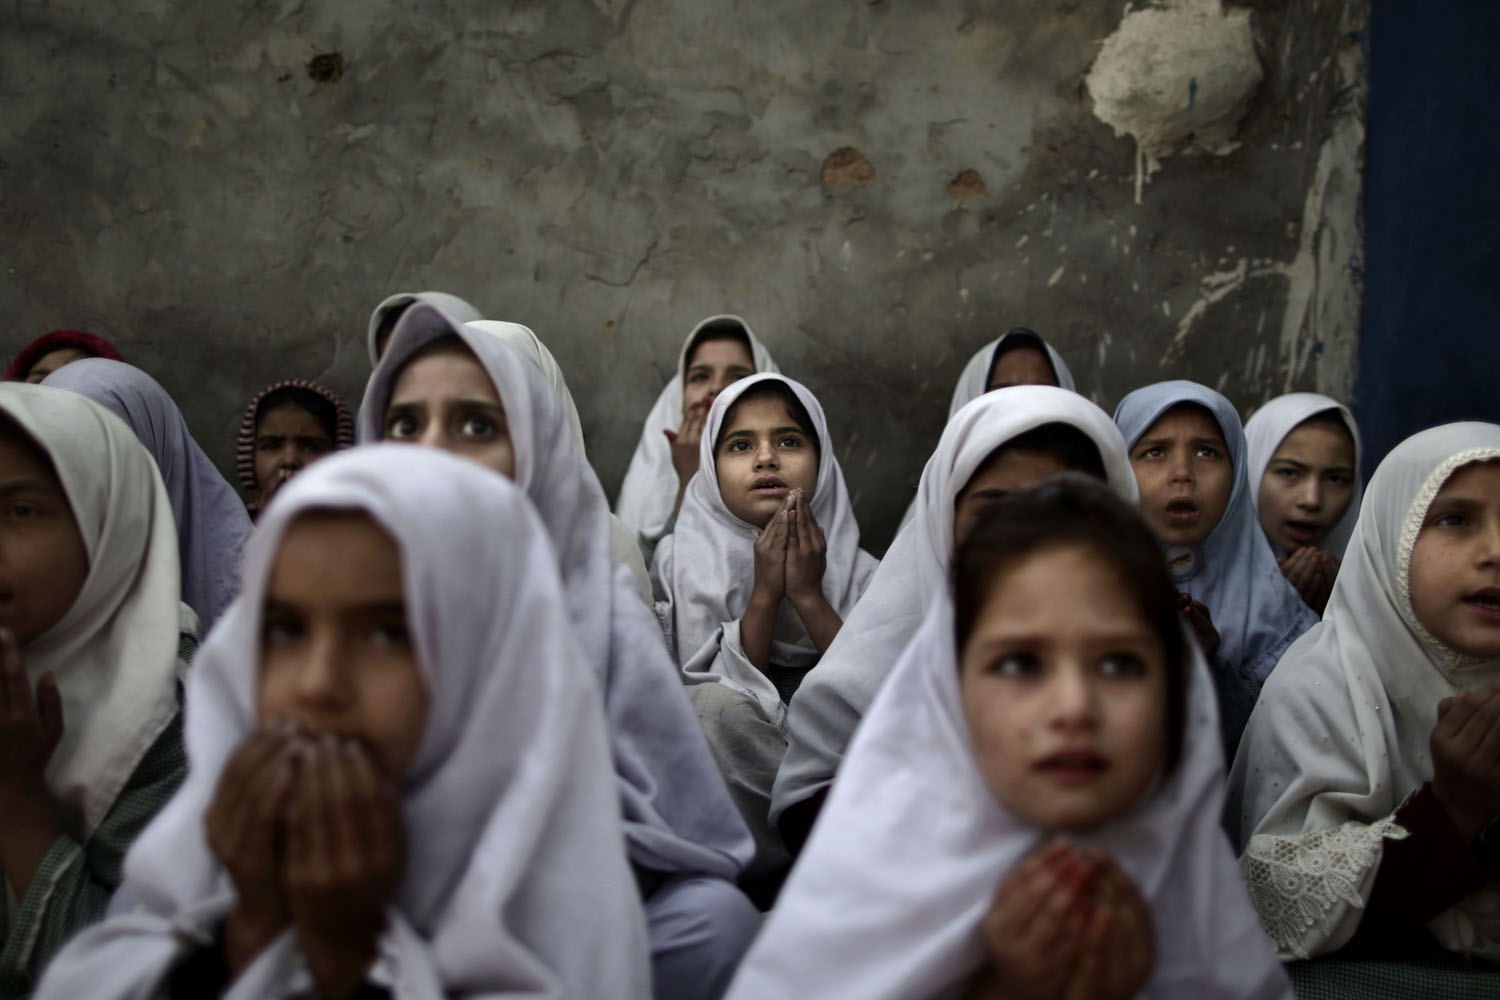 Jan. 3, 2013. Pakistani schoolgirls, who were displaced with their families from Pakistan's tribal areas due to fighting between militants and the army, chant prayers during a class to pay tribute for five female teachers and two aid workers who were killed by gunmen in Northwest Pakistan.